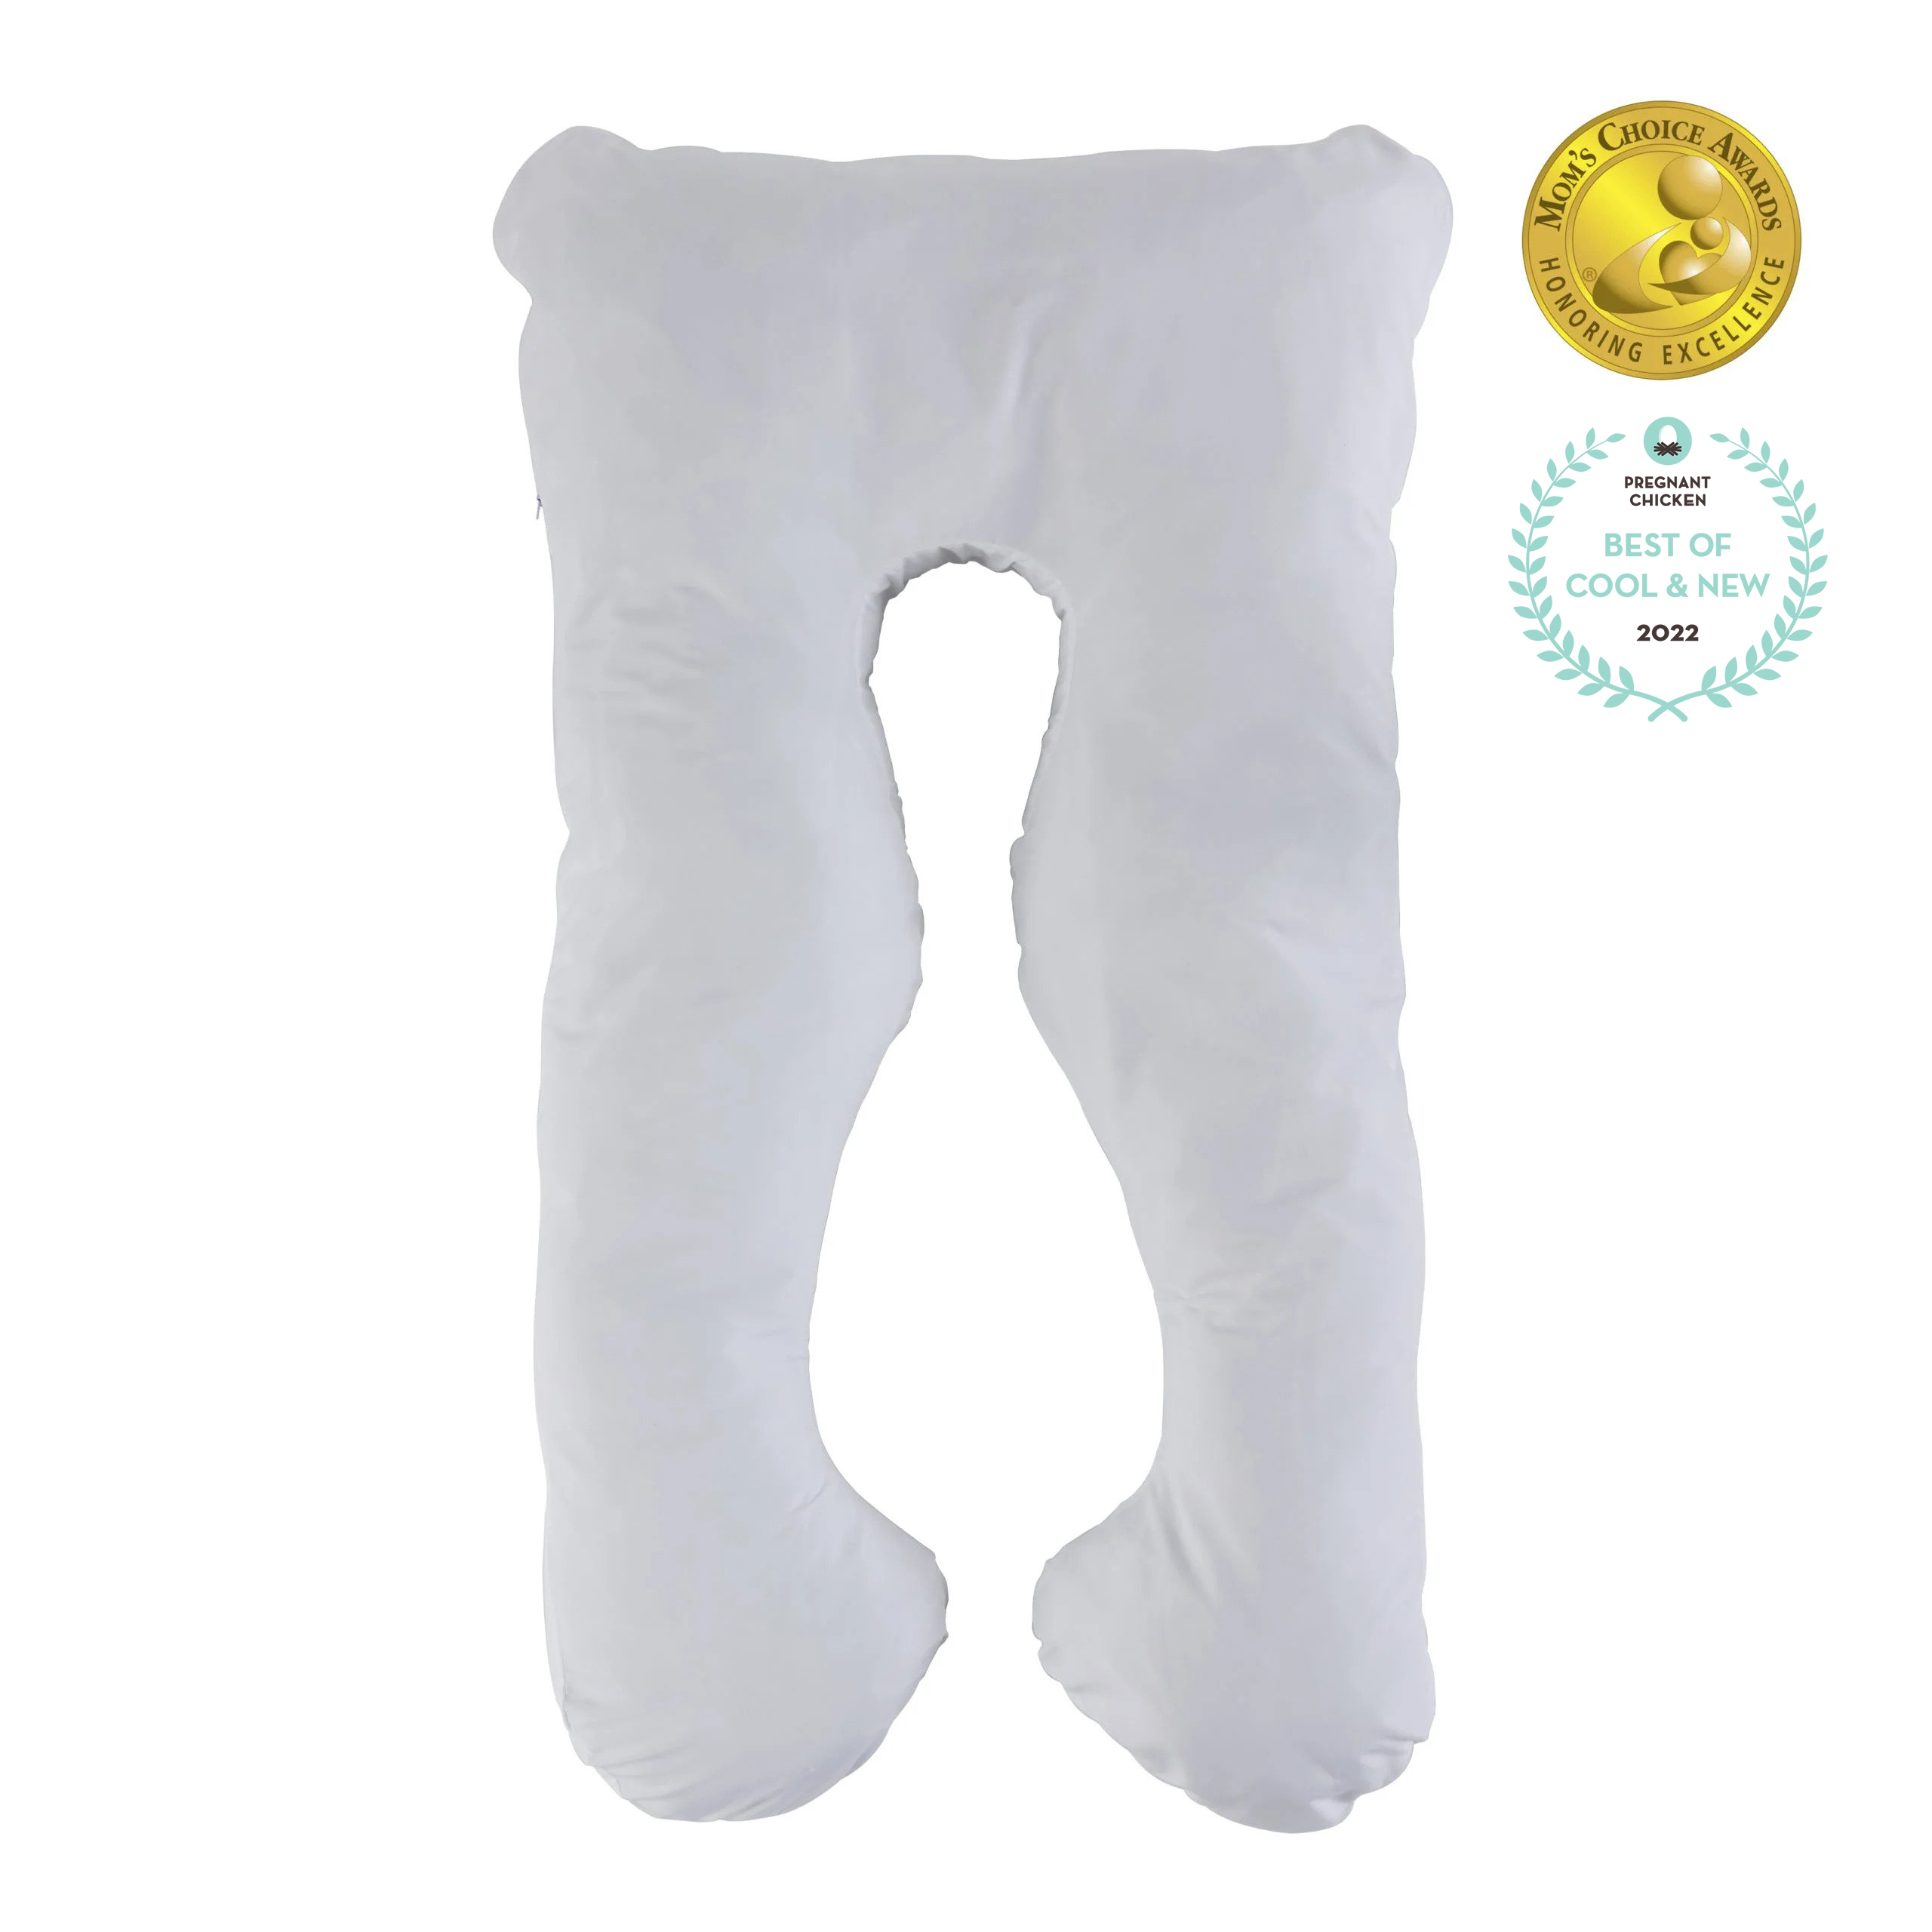 Pregnancy Pillow U Shape Full Body Pillow And Maternity Support For  Pregnant Womengray